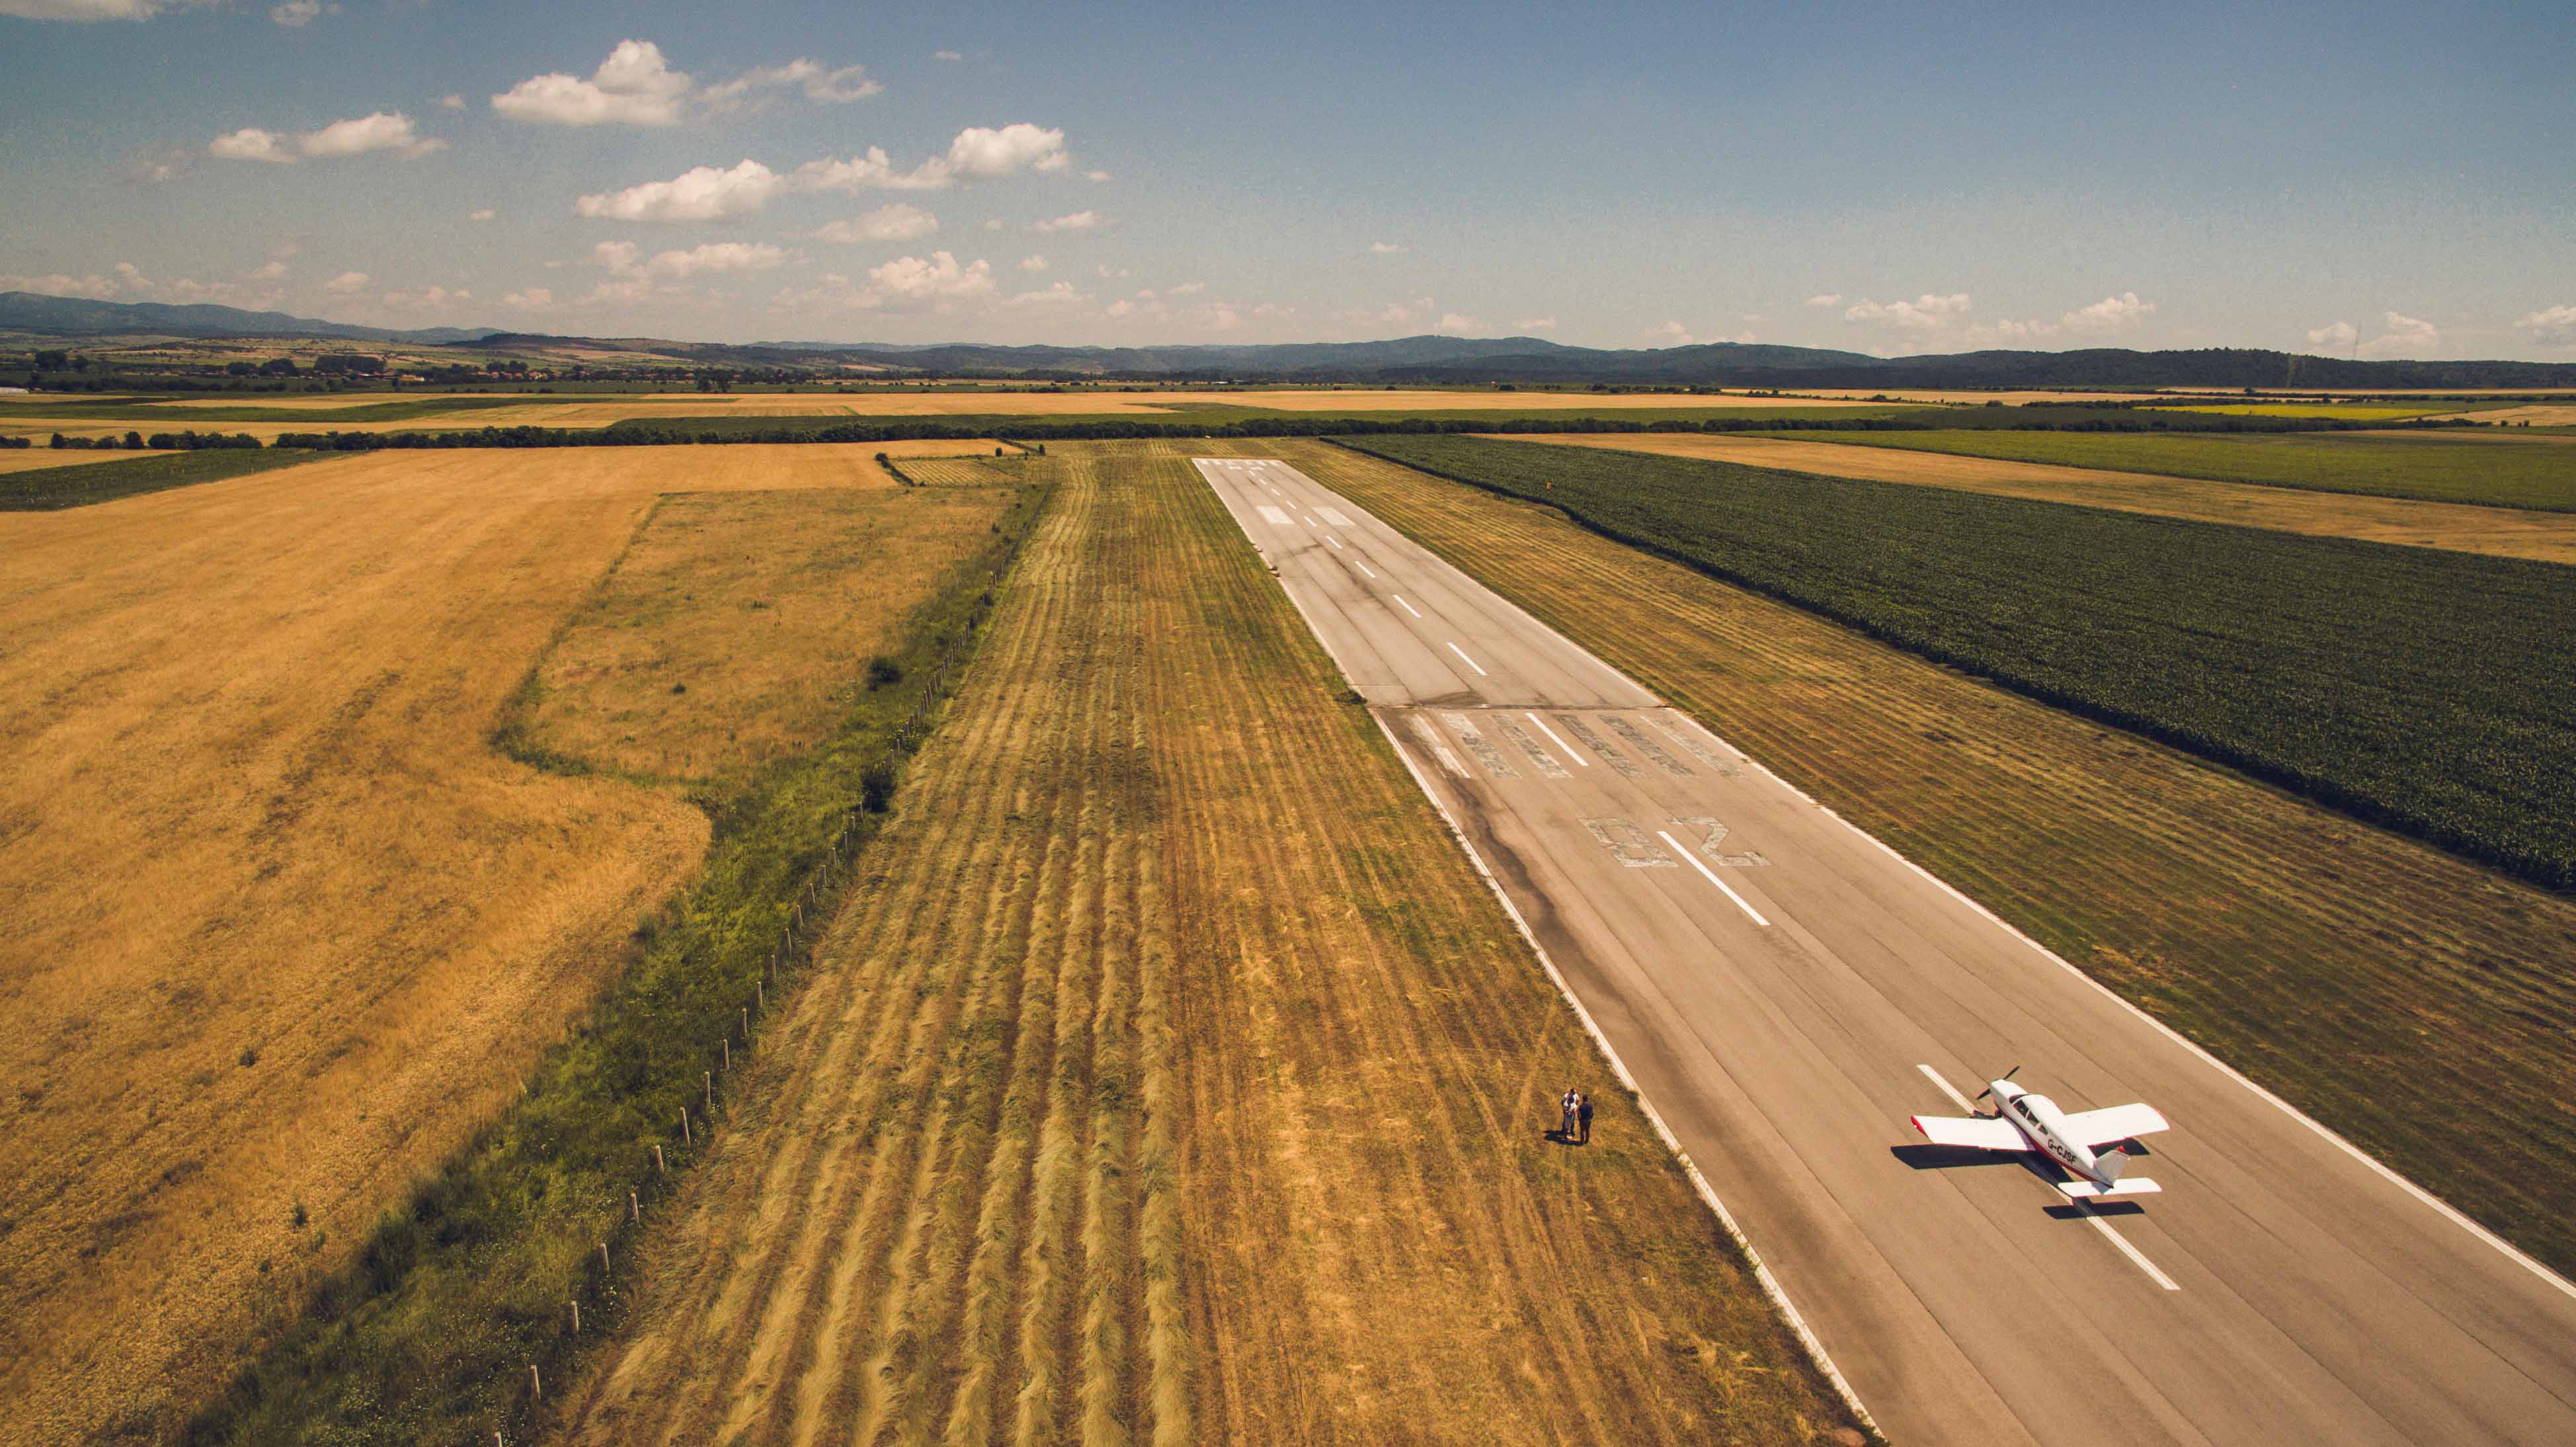 runway surrounded by wheat field